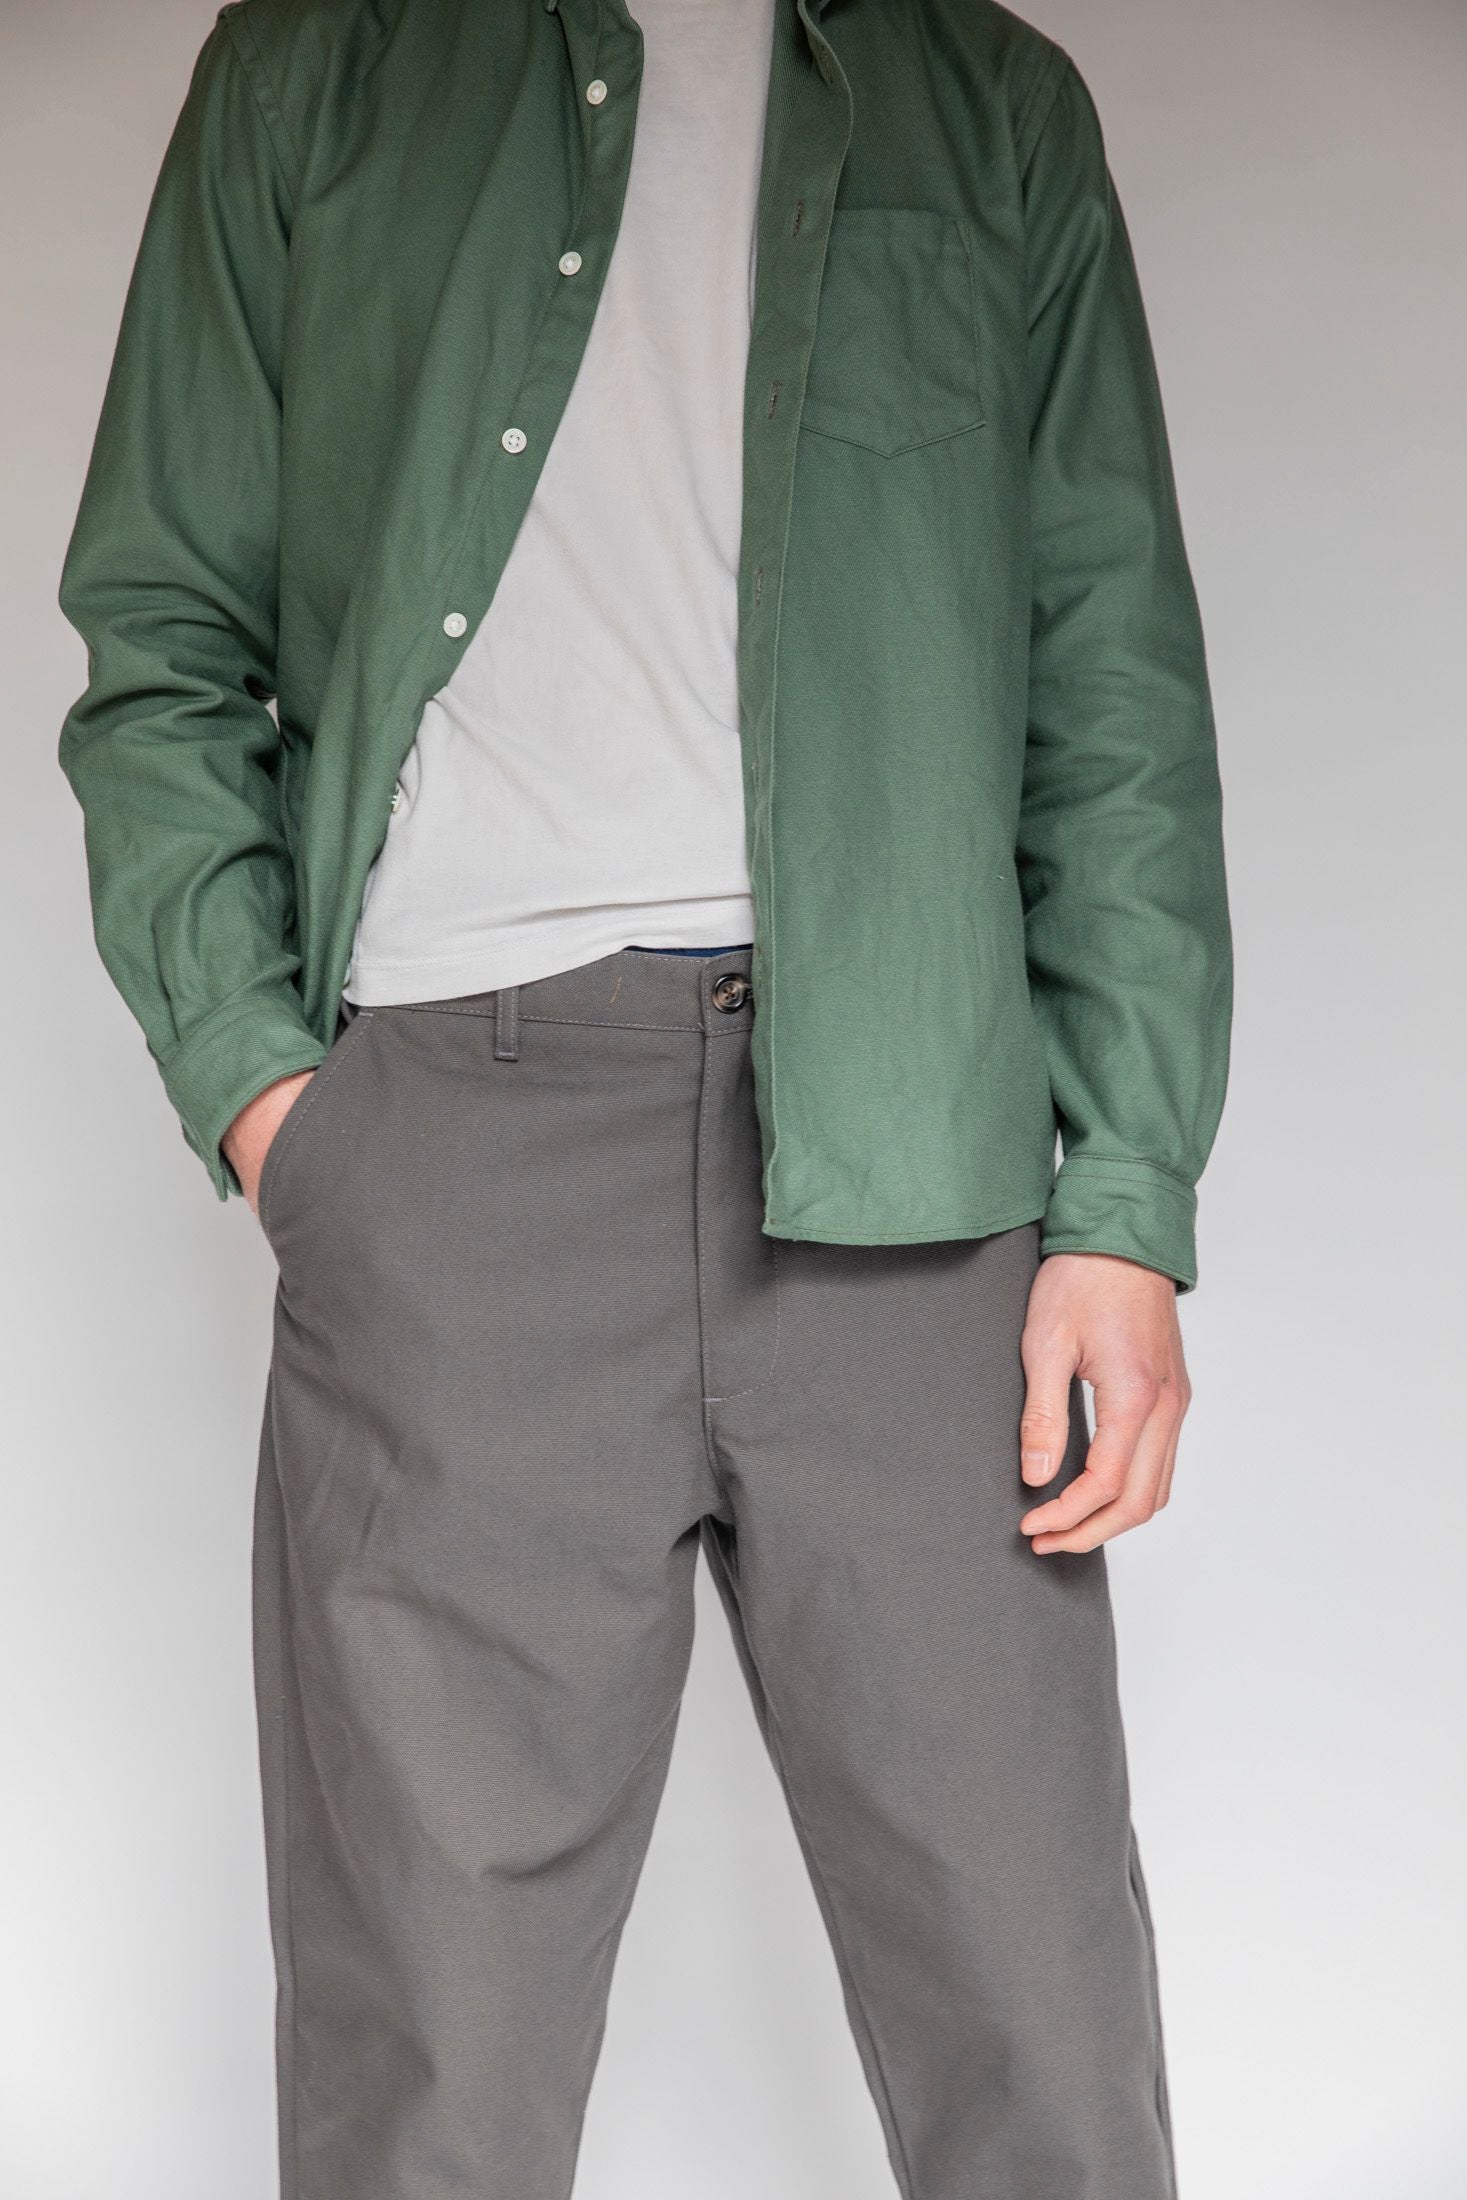 Model standing up wearing Single needle shirt in bottle green canvas, white t-shirt and charcoal danver pants